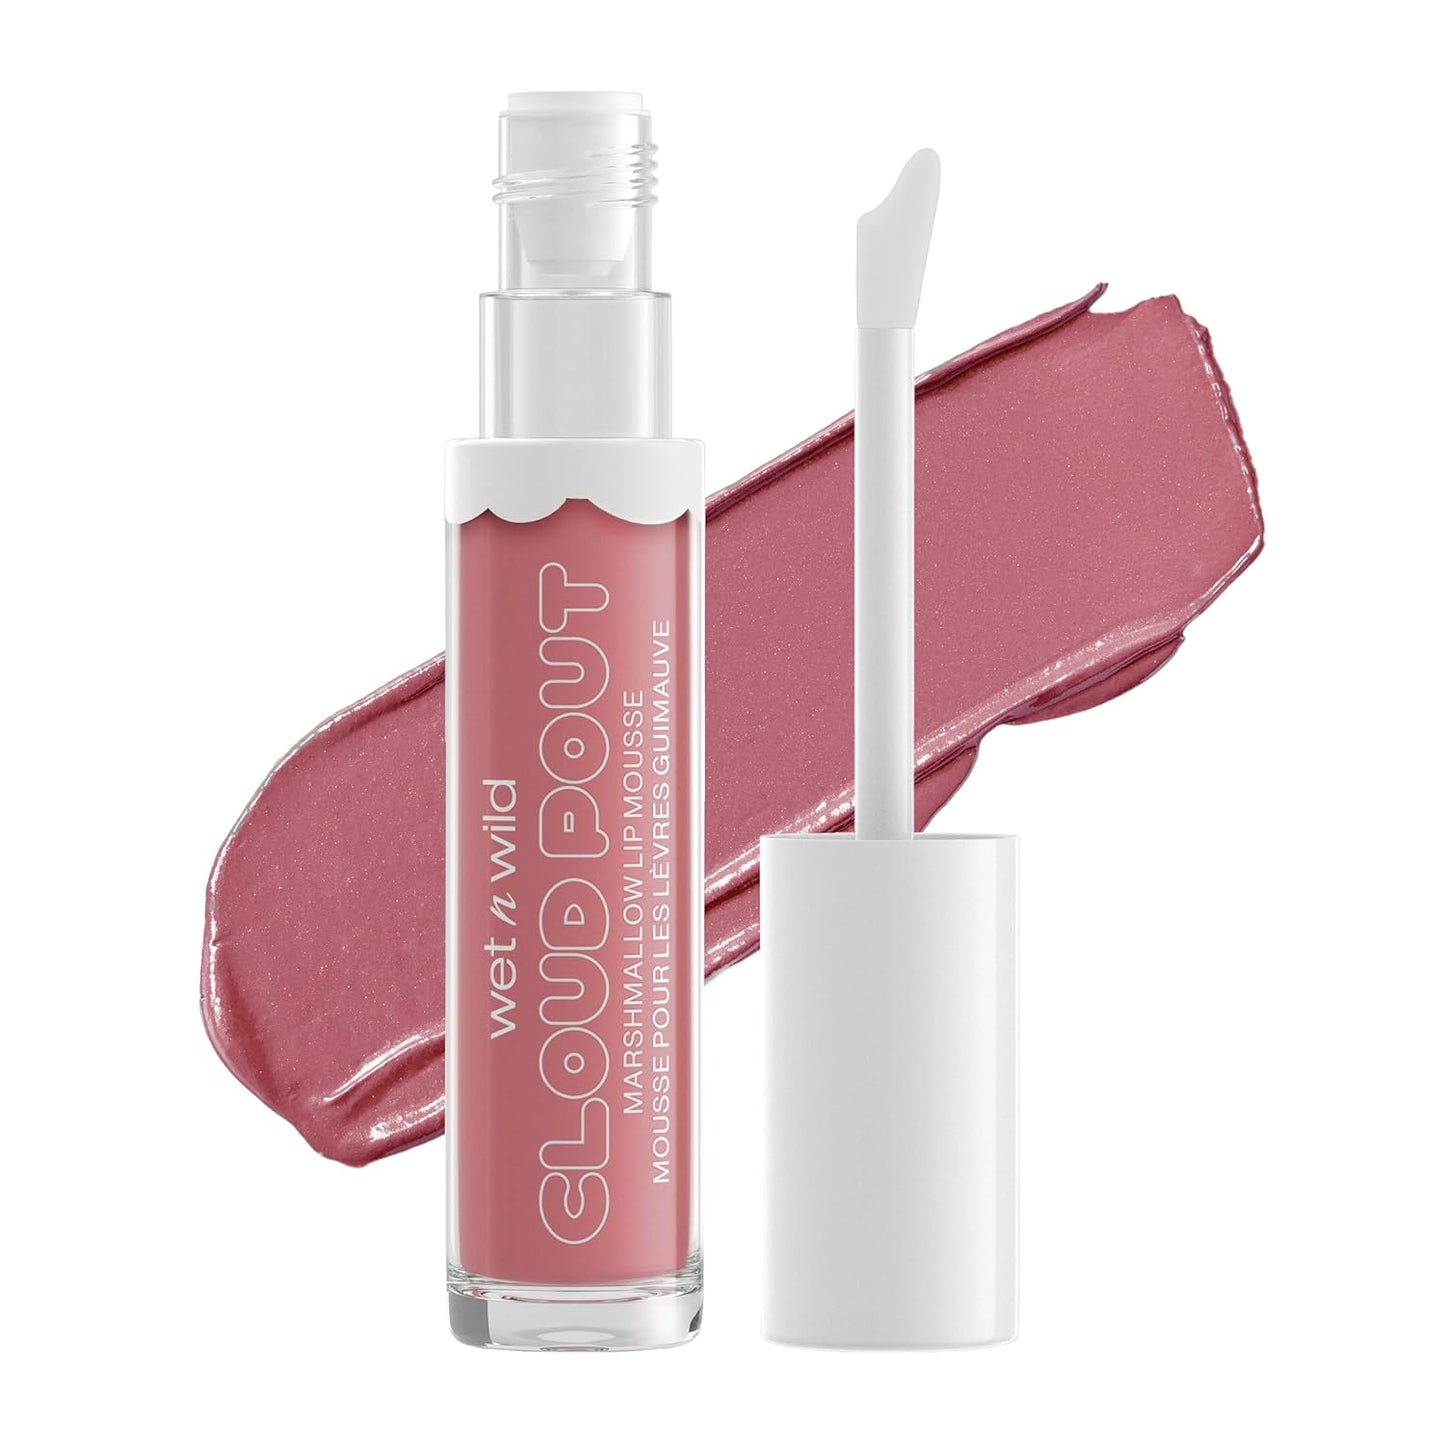 Wet n Wild Cloud Pout Marshmallow Lip Mousse Girl You're Whipped